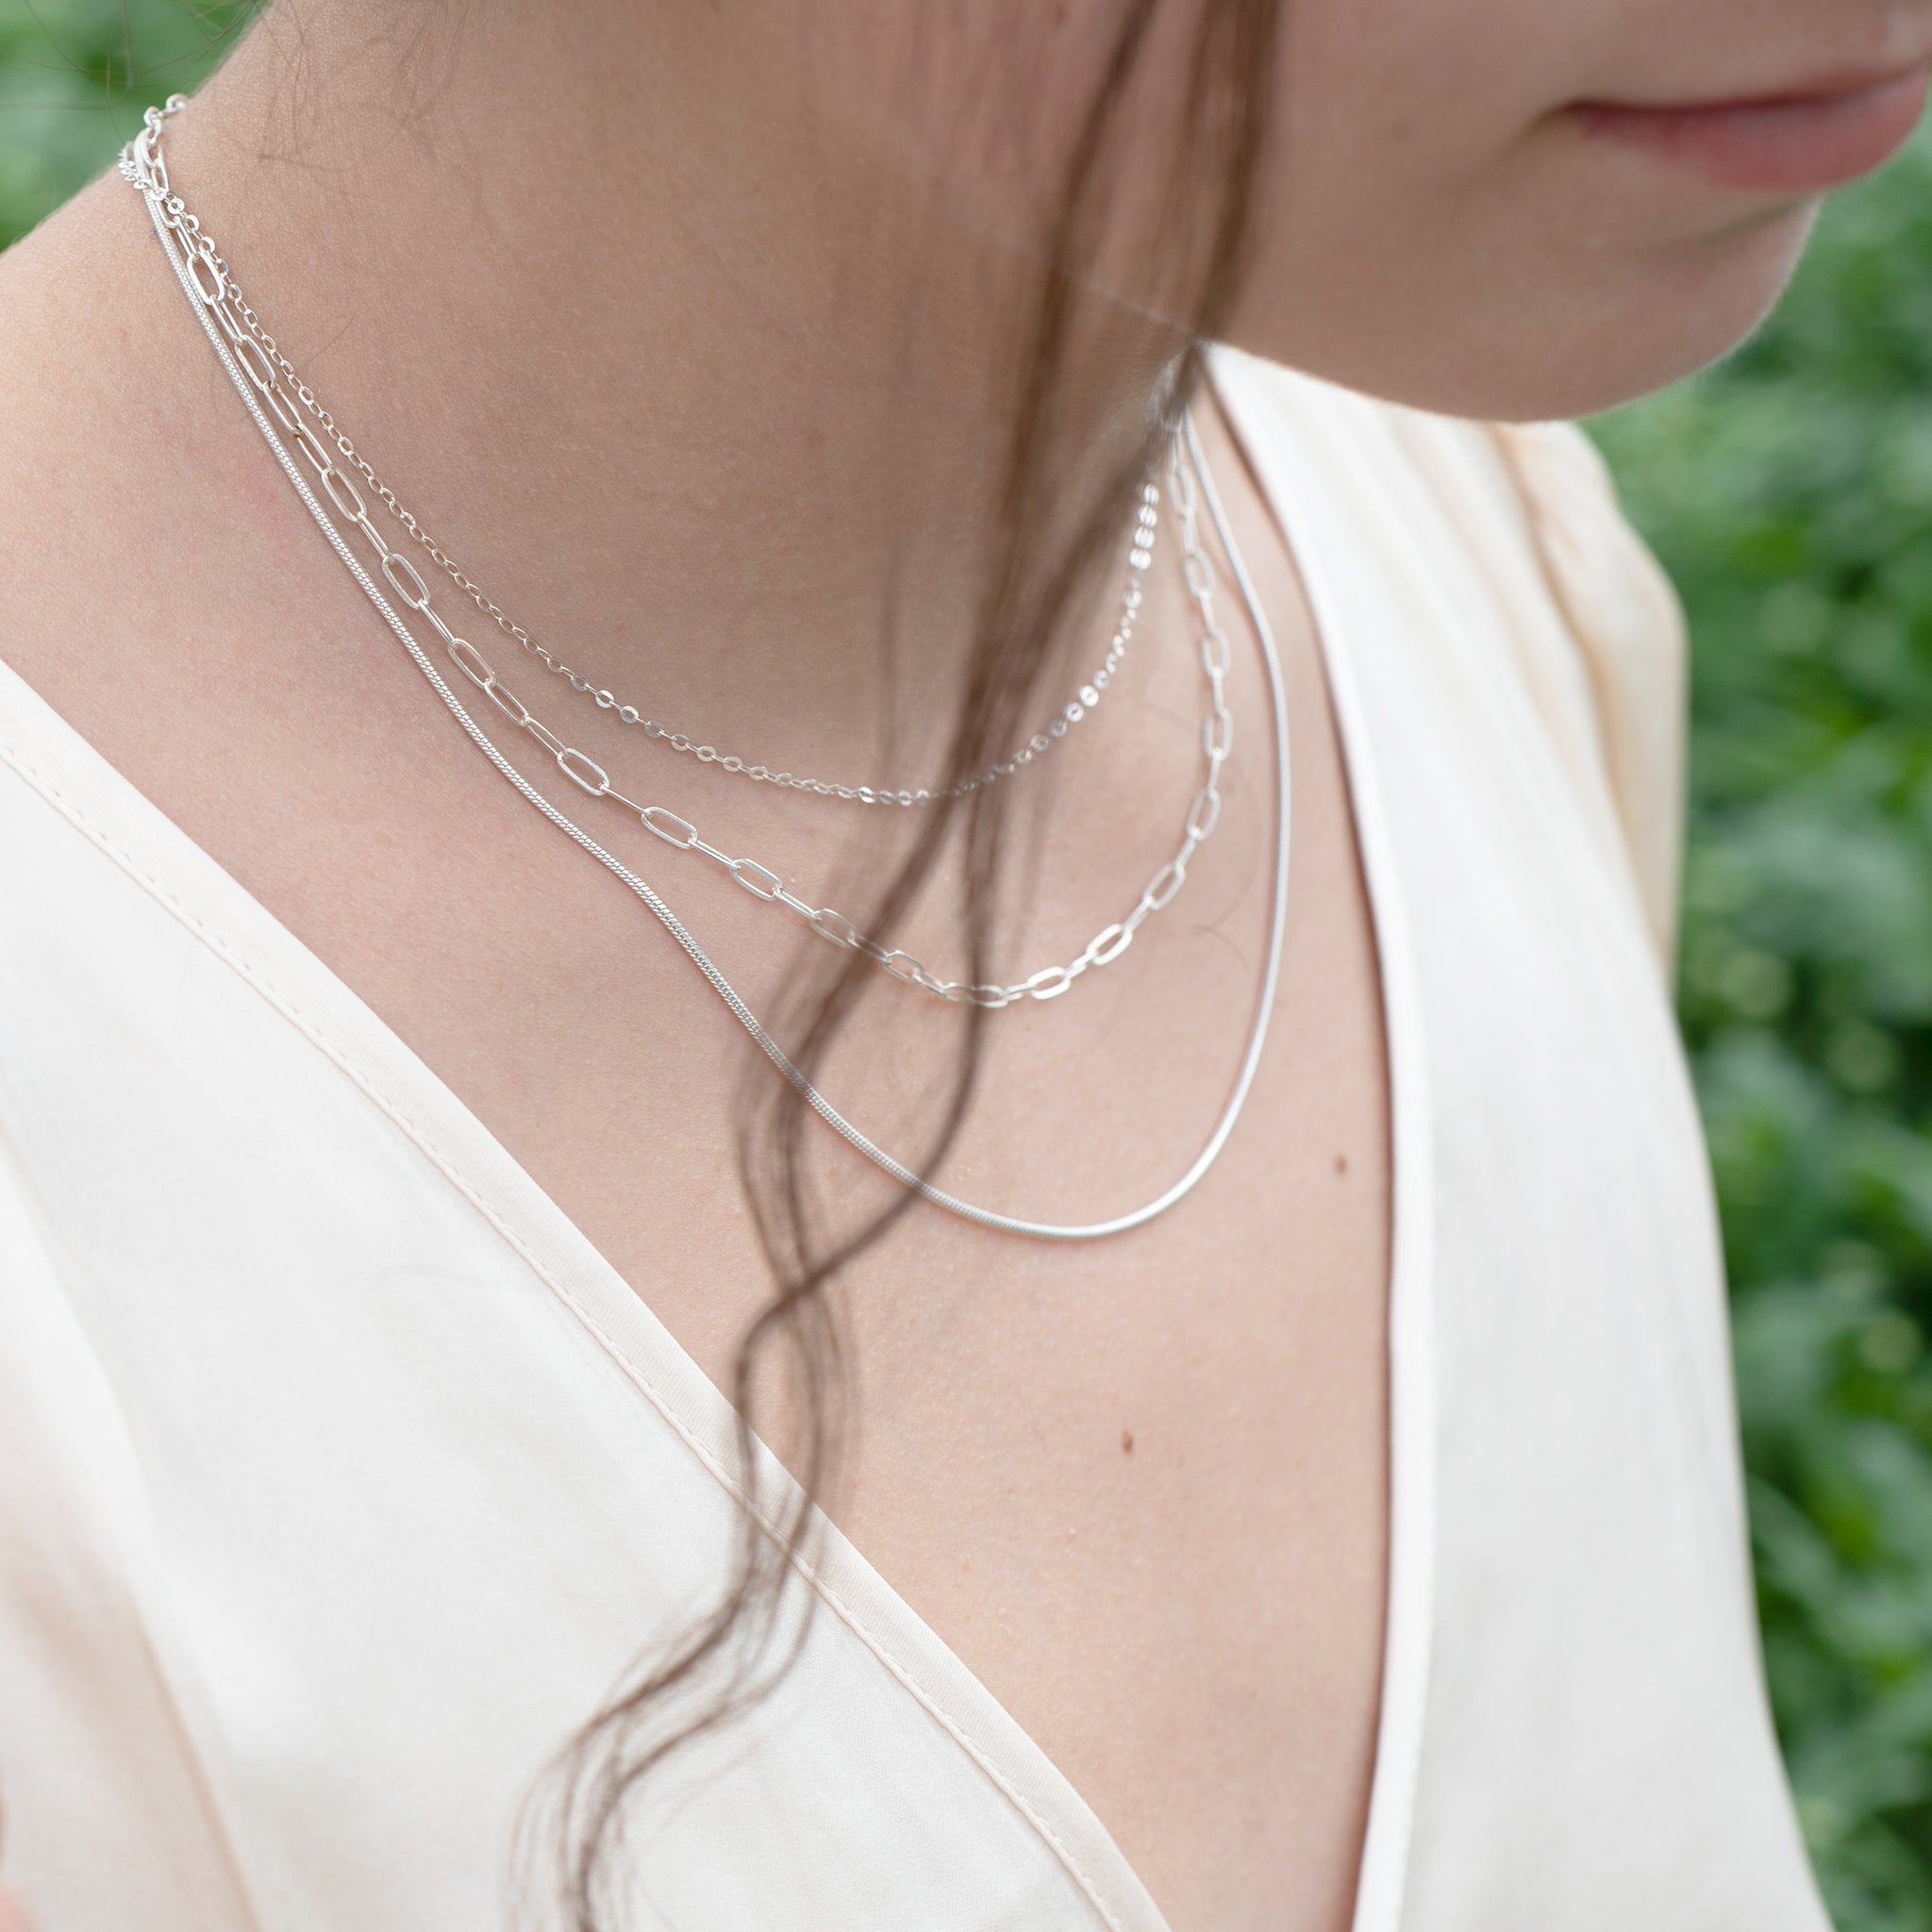 Silver Necklace, Silver Chain Necklace, Layering Necklace, Dainty